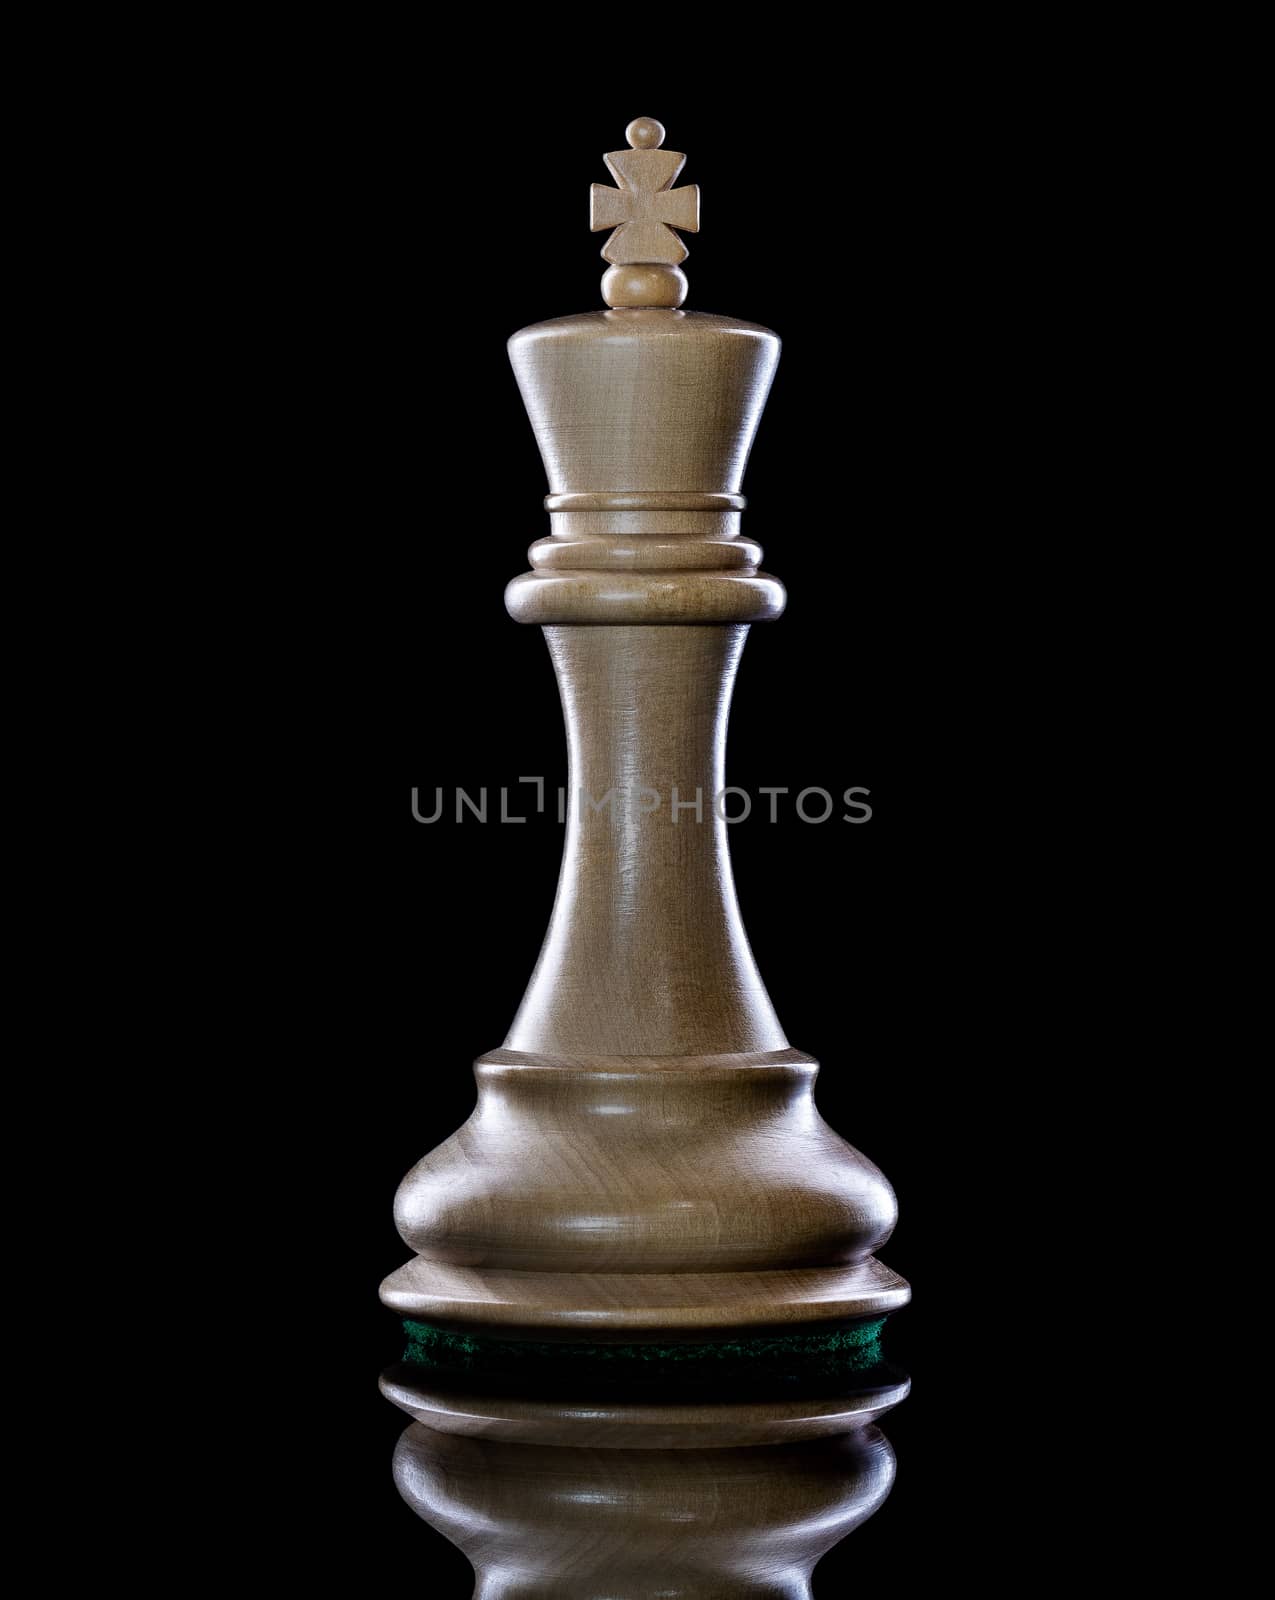 Black and White King of chess setup on dark background . Leader  by kerdkanno